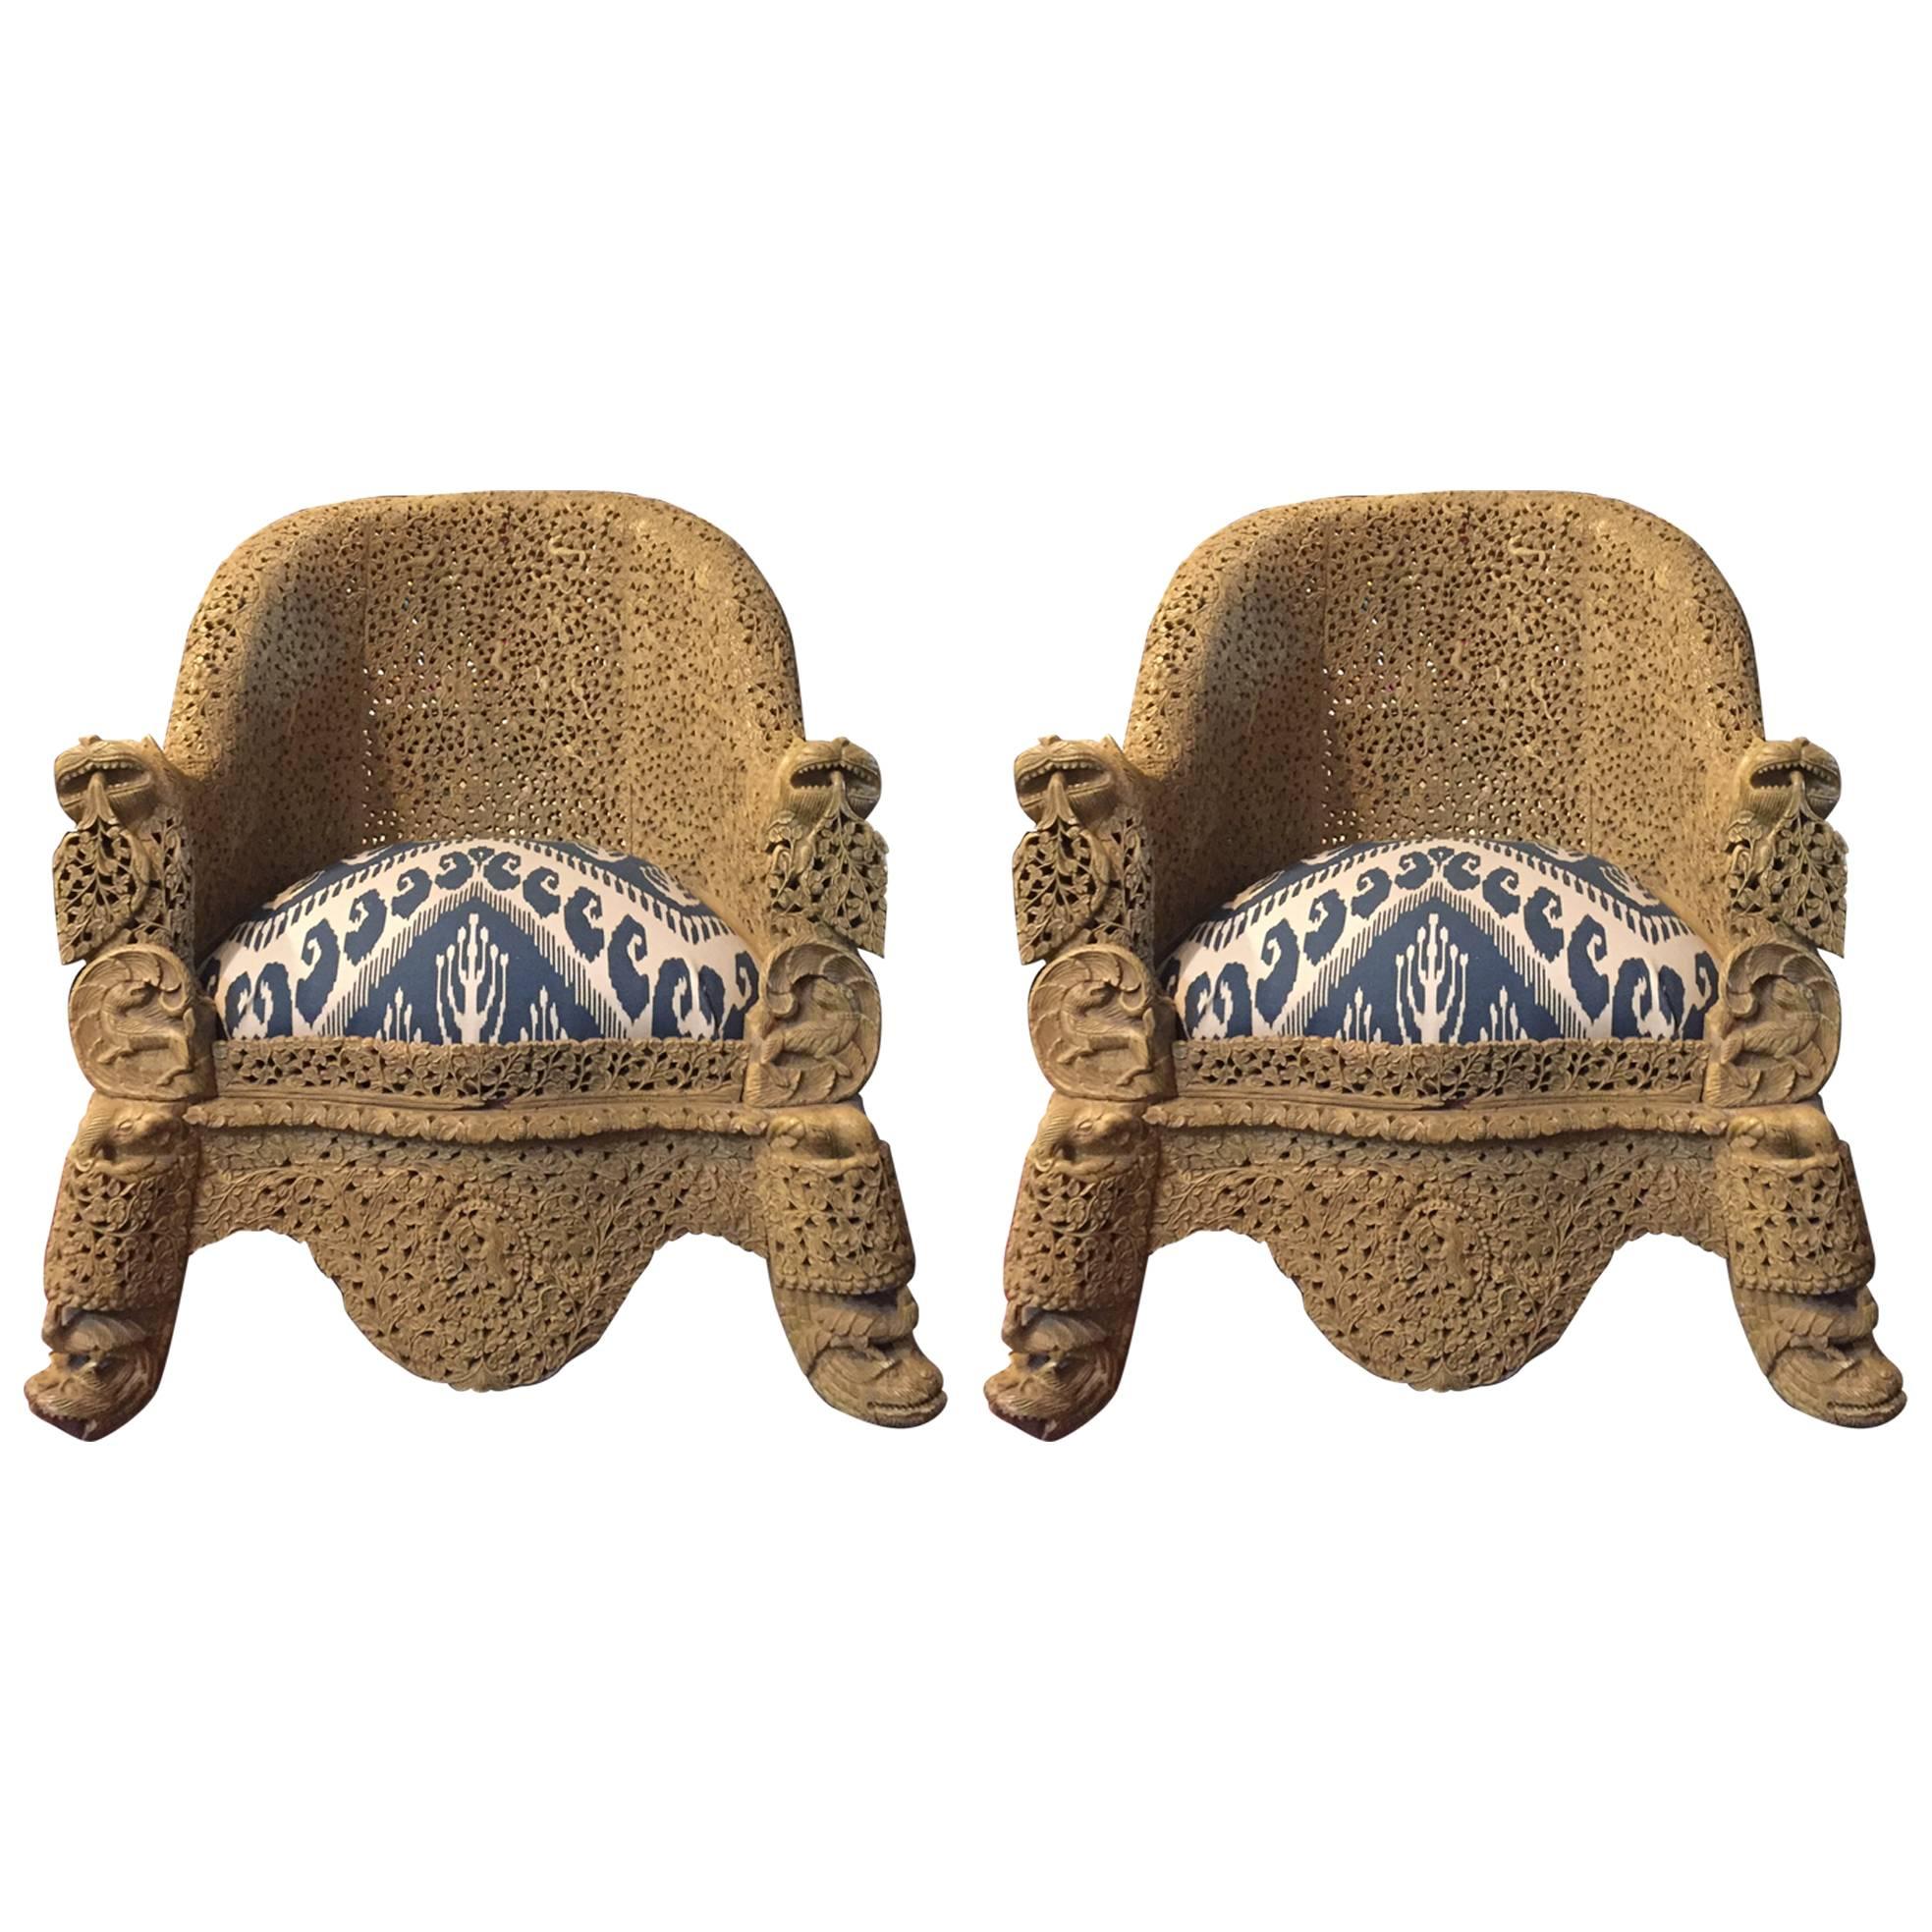 Pair of 19th Century Indian Carved Raj Chairs with Lion, Tiger, Flower Motif